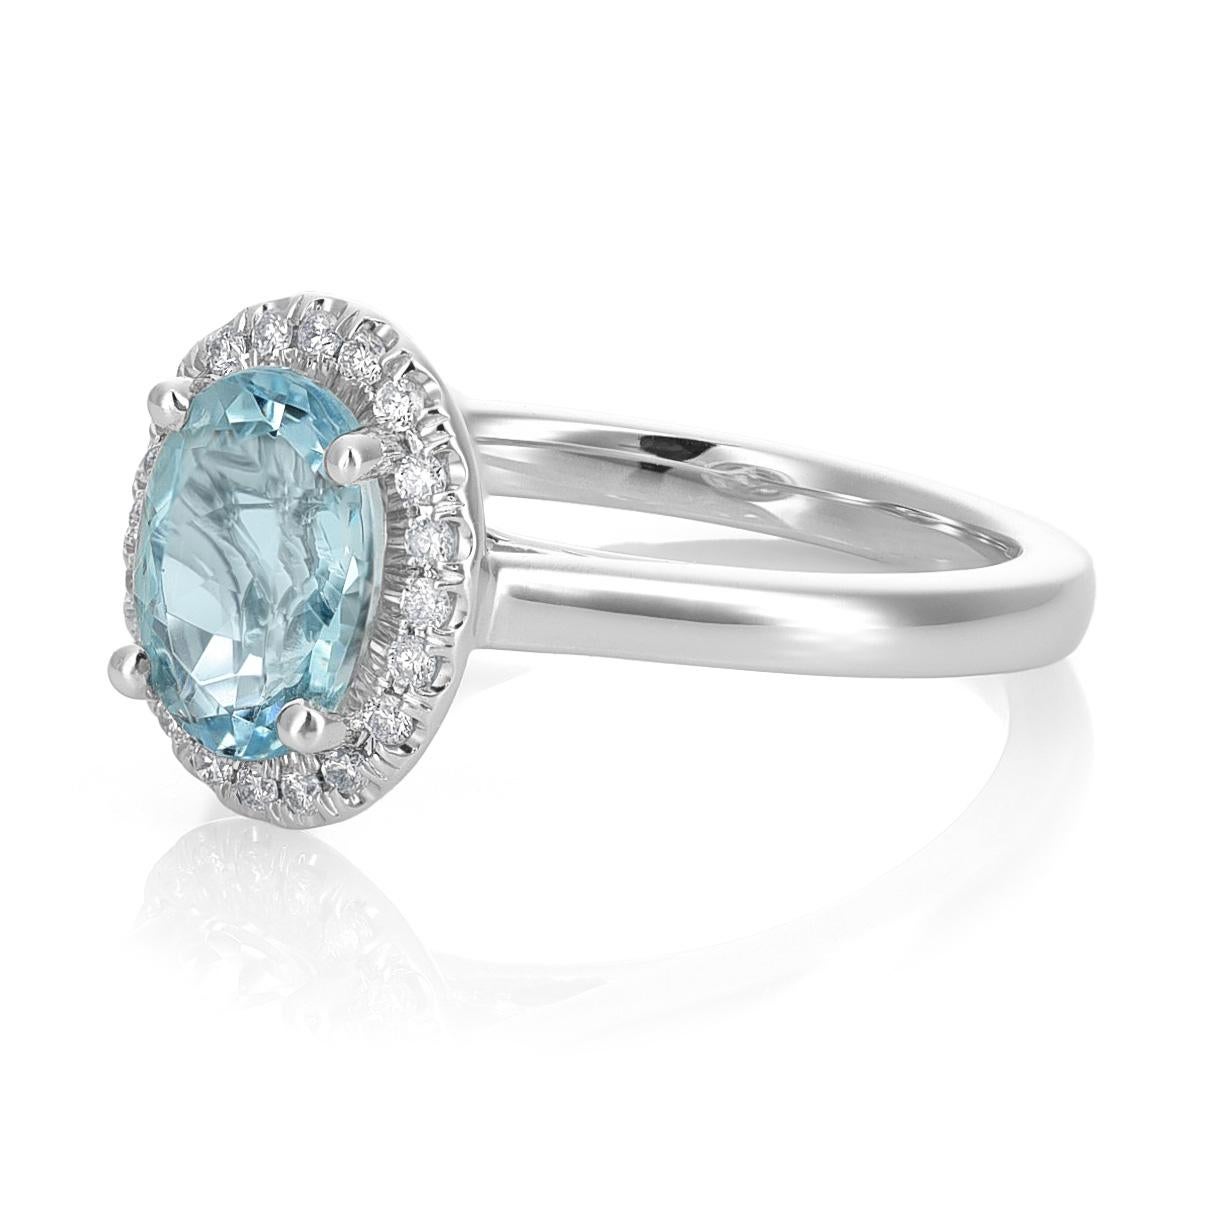 Presenting a captivating Natural Aquamarine, elegantly set in a 14K White Gold Ring adorned with 0.10 carats of Diamonds. The gem, in a graceful oval shape, exudes a serene beauty, accentuated by its subtle blue hue. This enchanting piece, with a